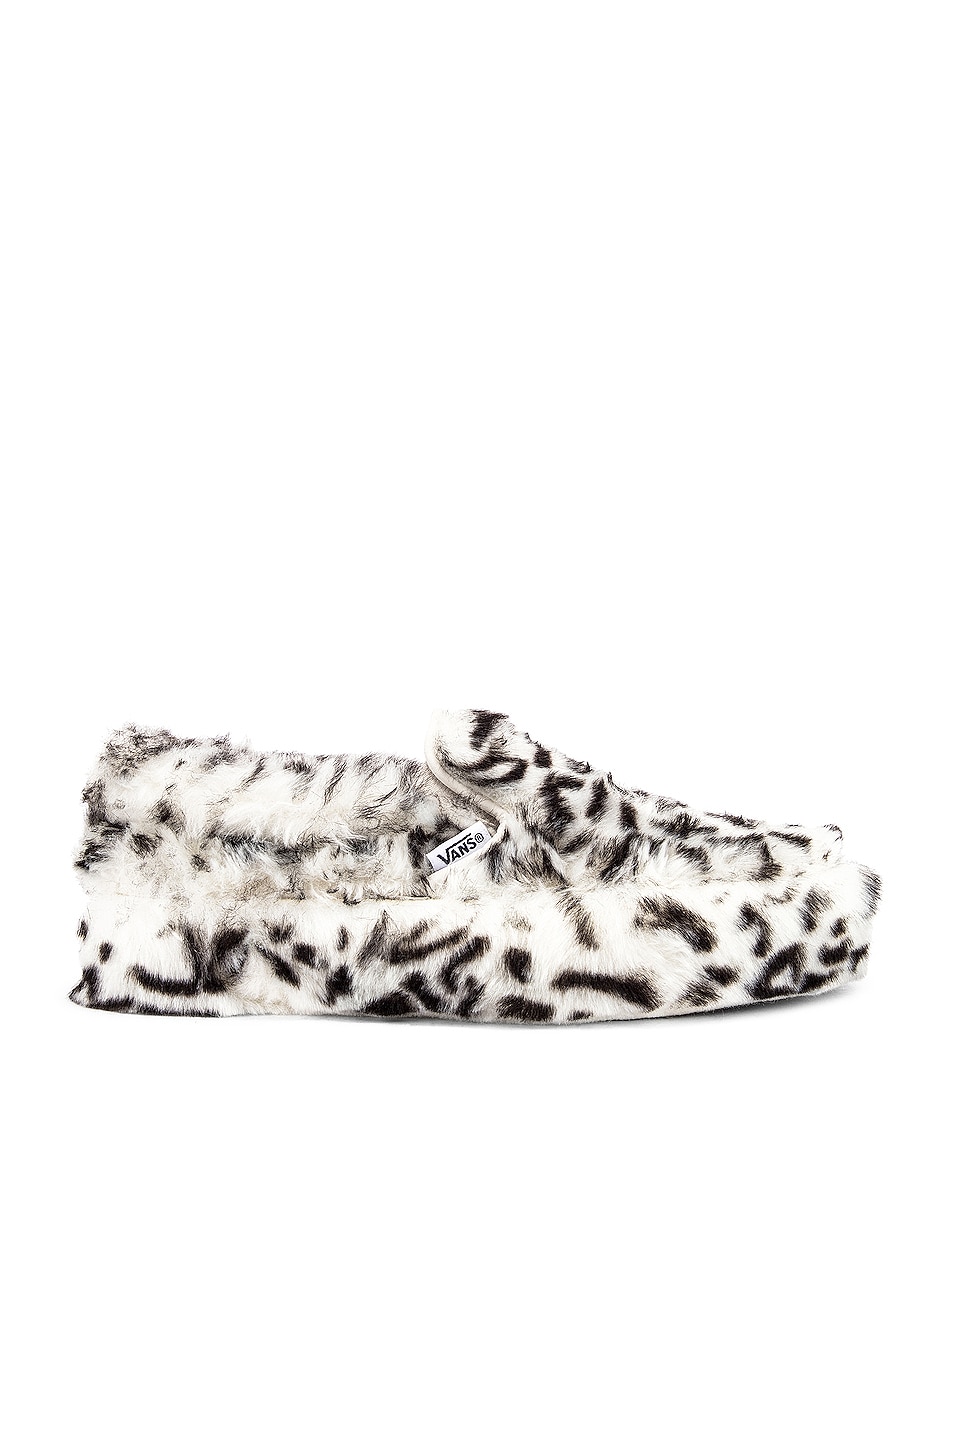 Image 1 of Vans x Sandy Liang Classic Slip-On Platform in Paws & True White